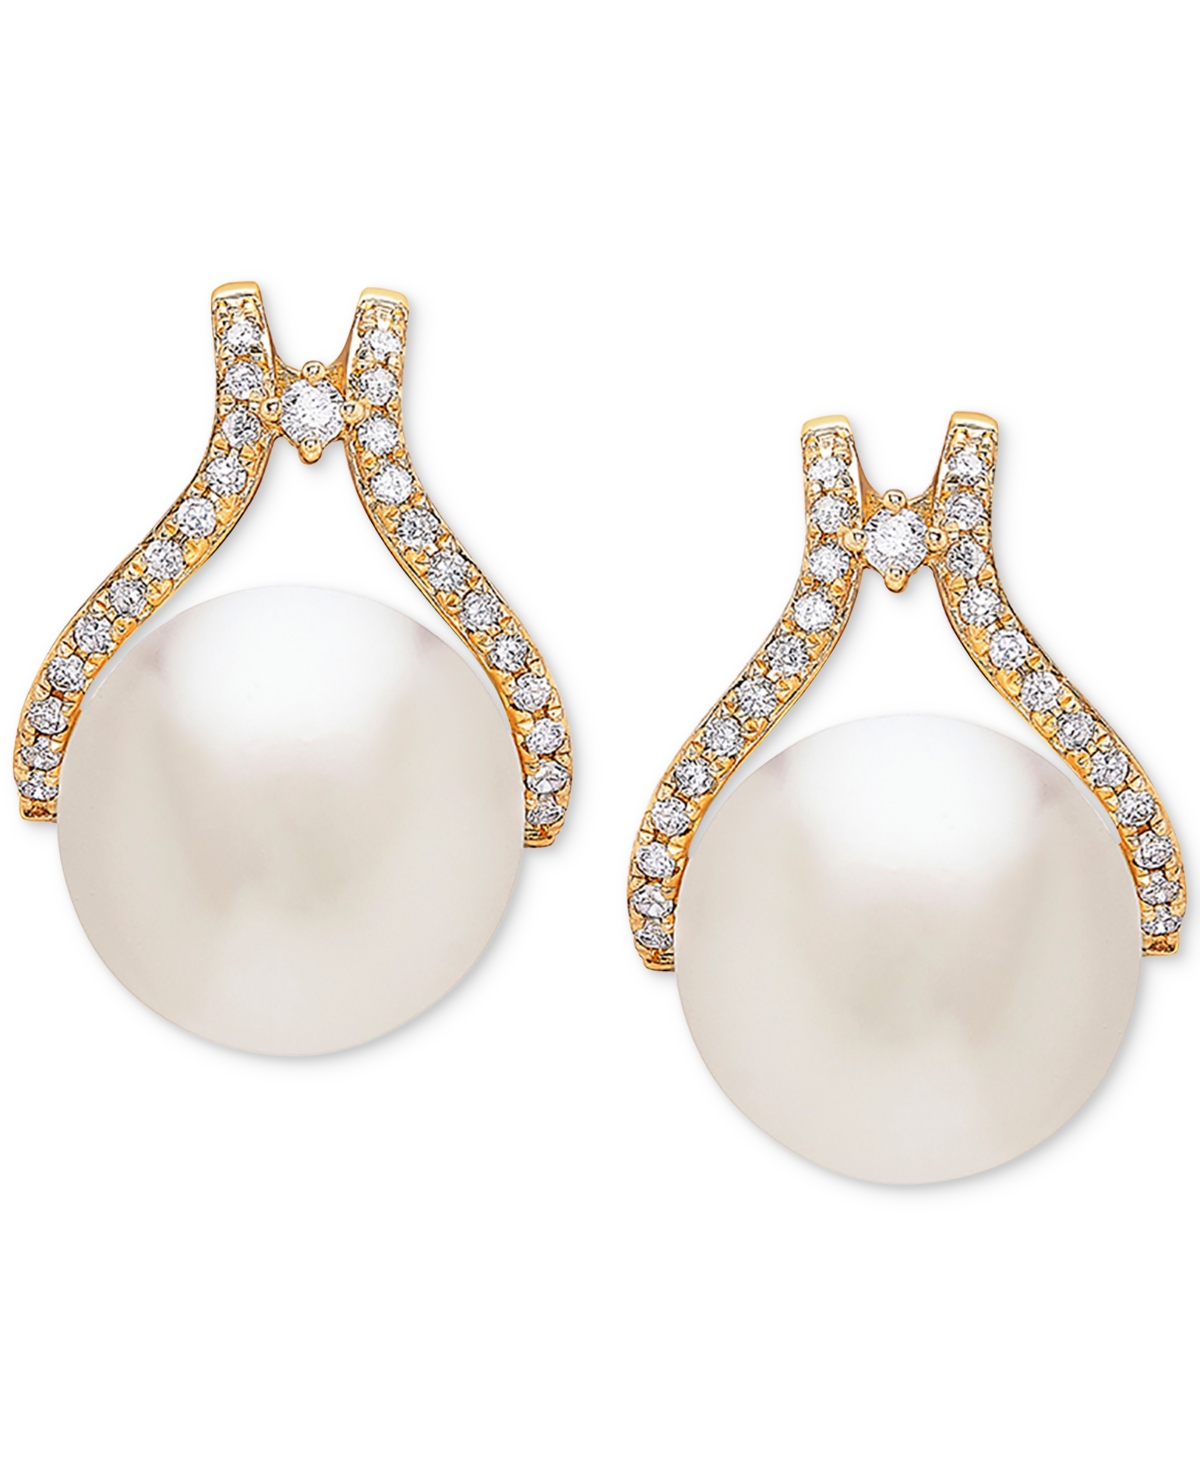 Cultured White Ming Pearl (12mm) & Diamond (1/3 ct. t.w.) Stud Earrings in 14k Gold - Yellow Gold